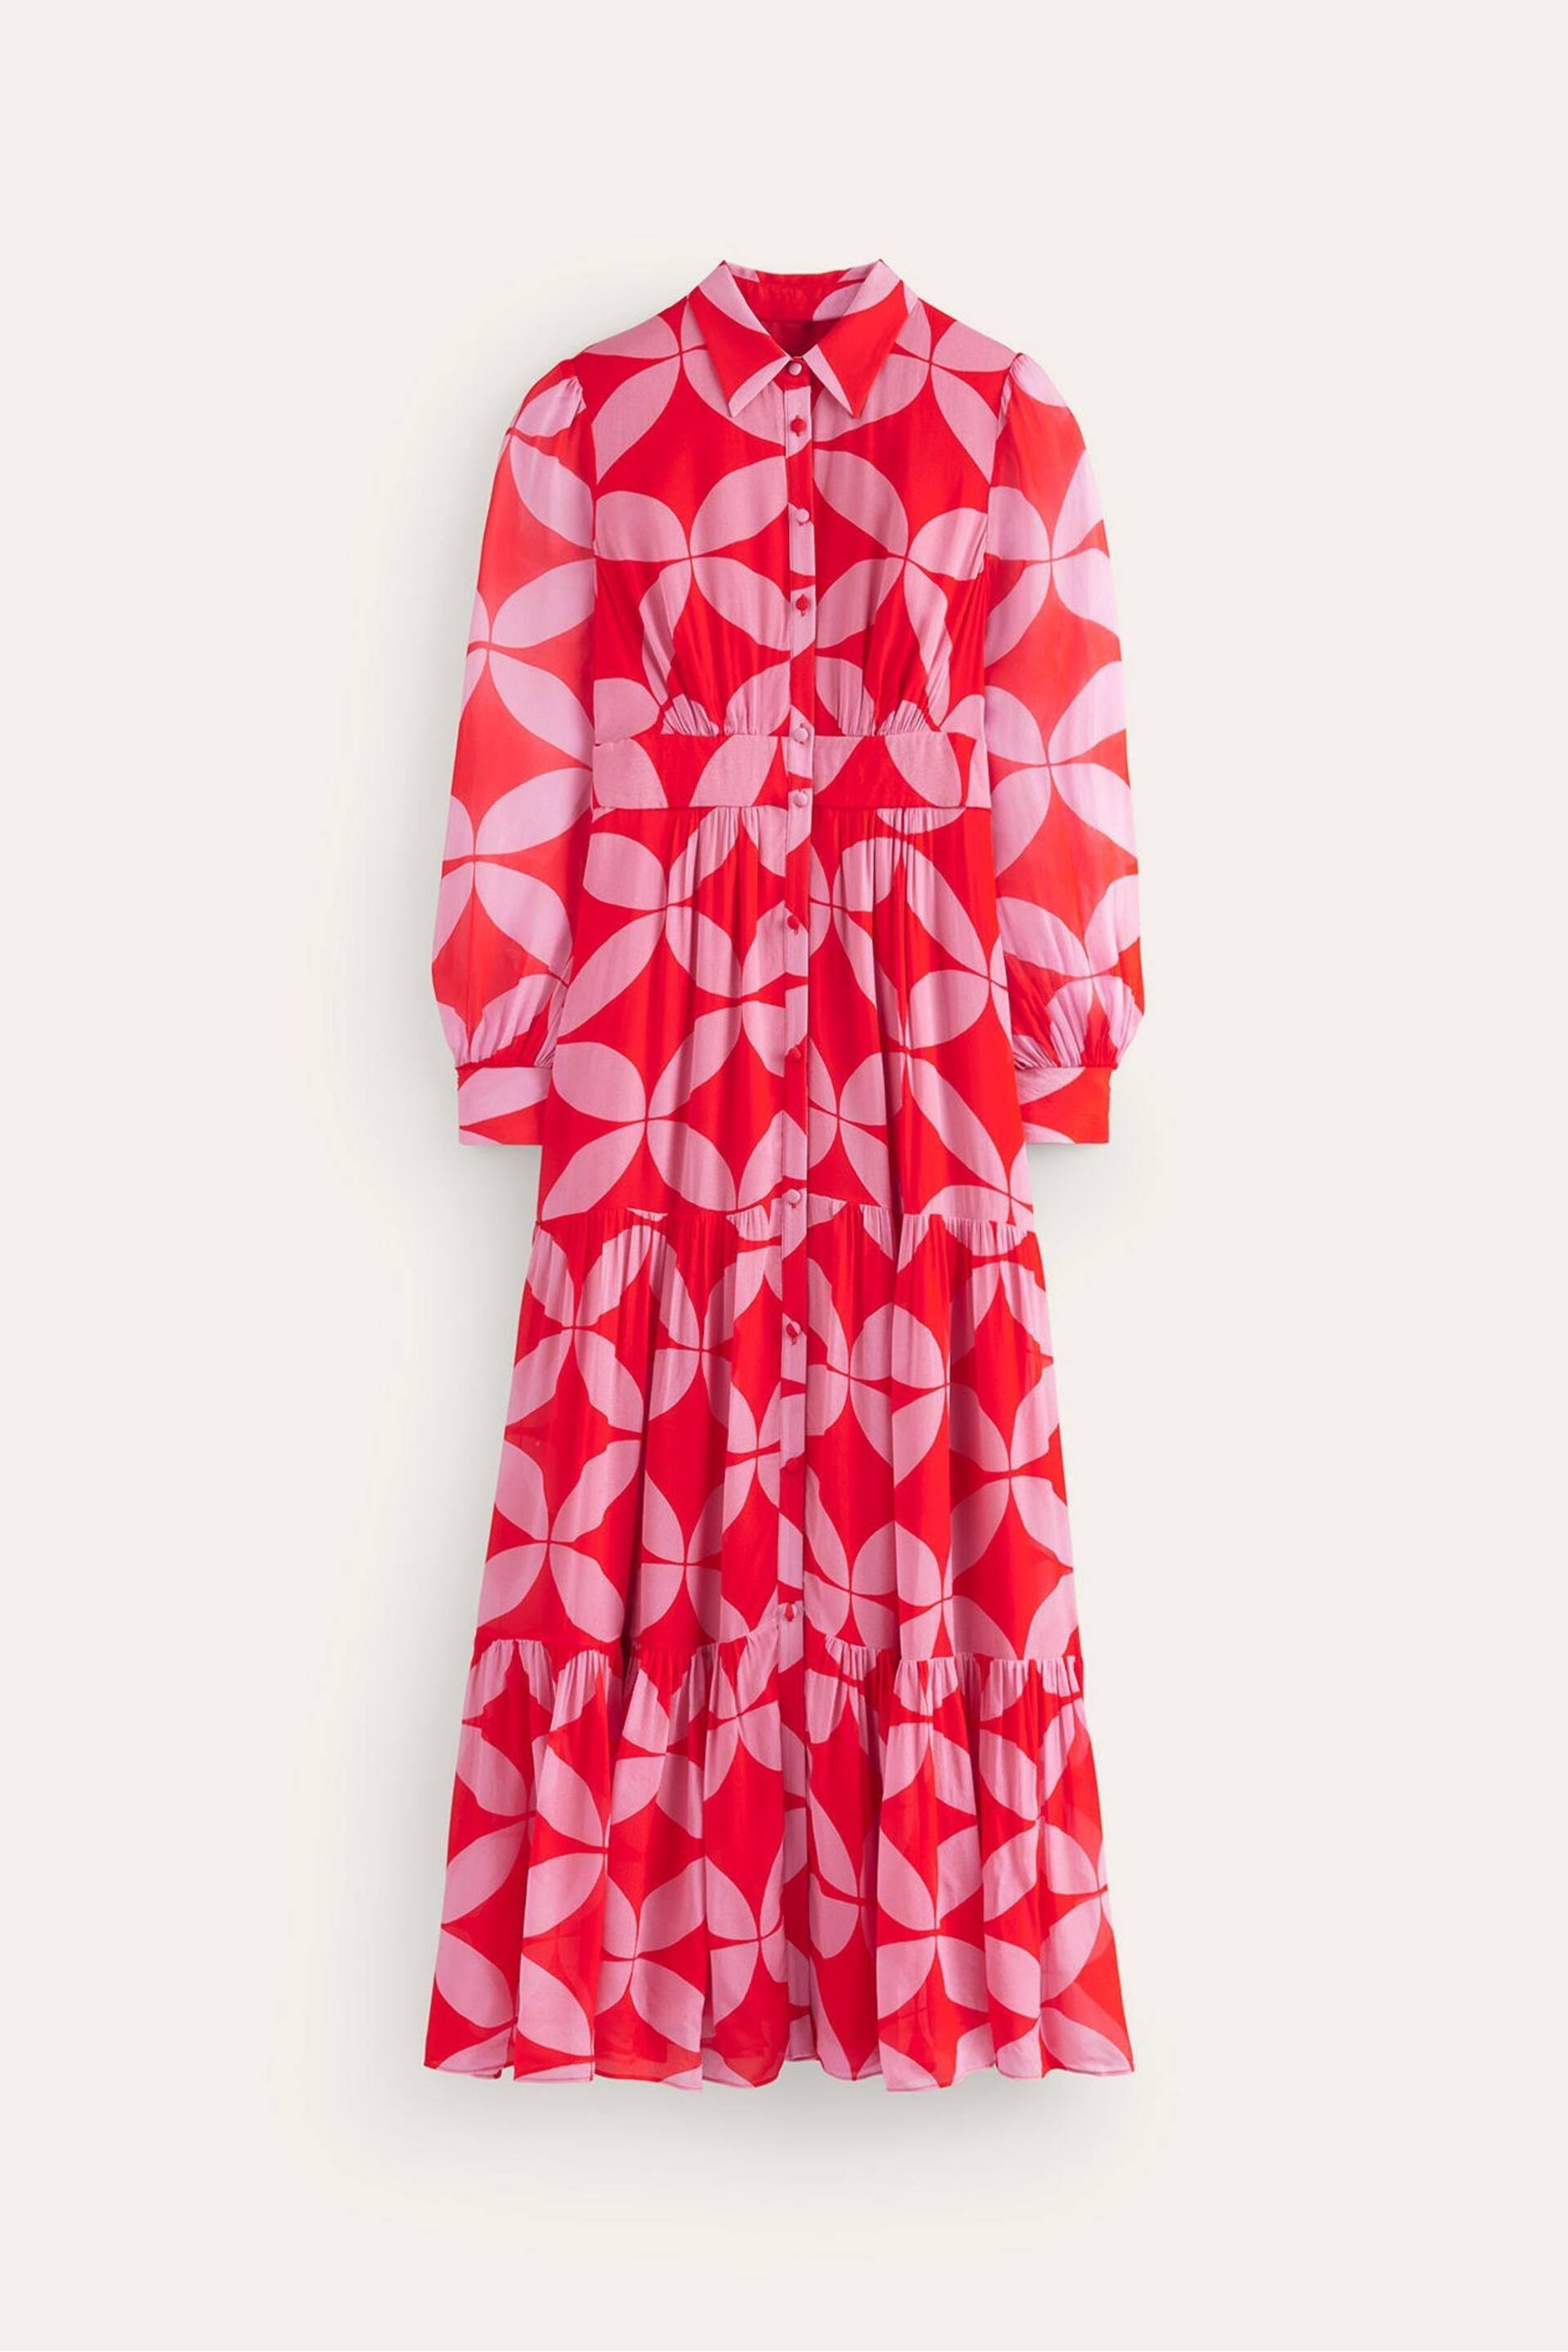 Boden Red Occasion Maxi Shirt Dress - Image 6 of 6